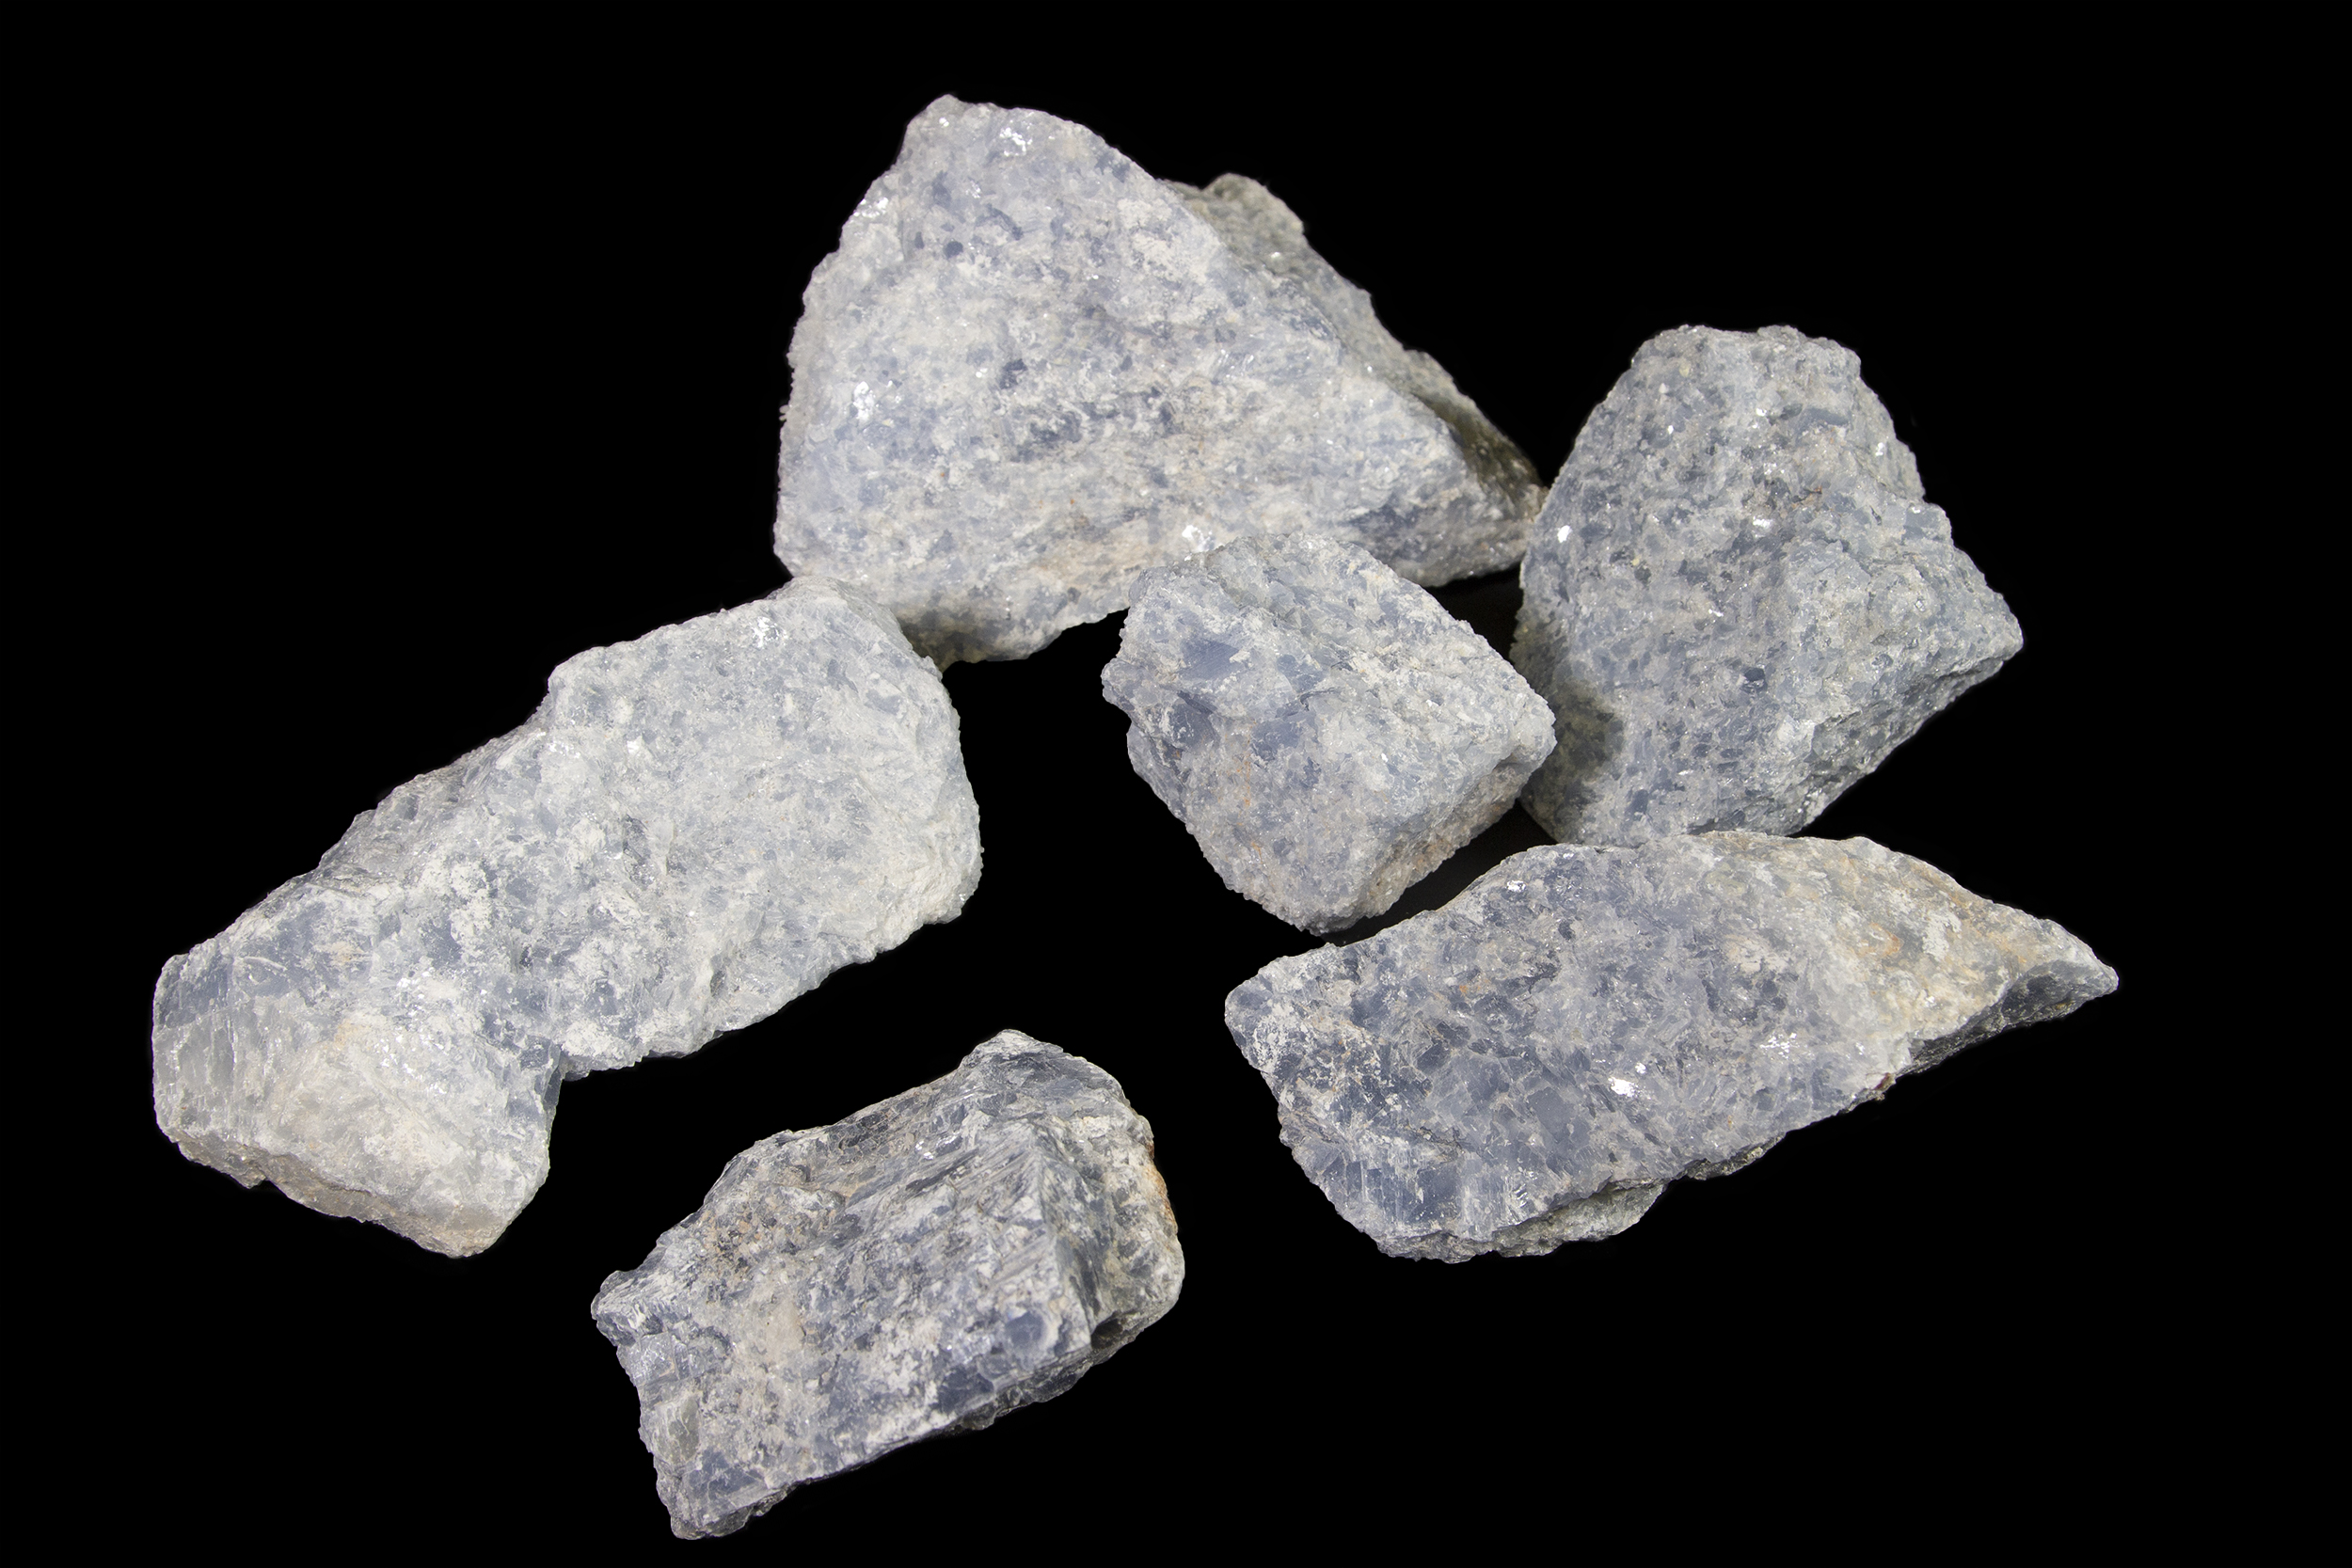 Blue Calcite Mineral - Mini Me Geology